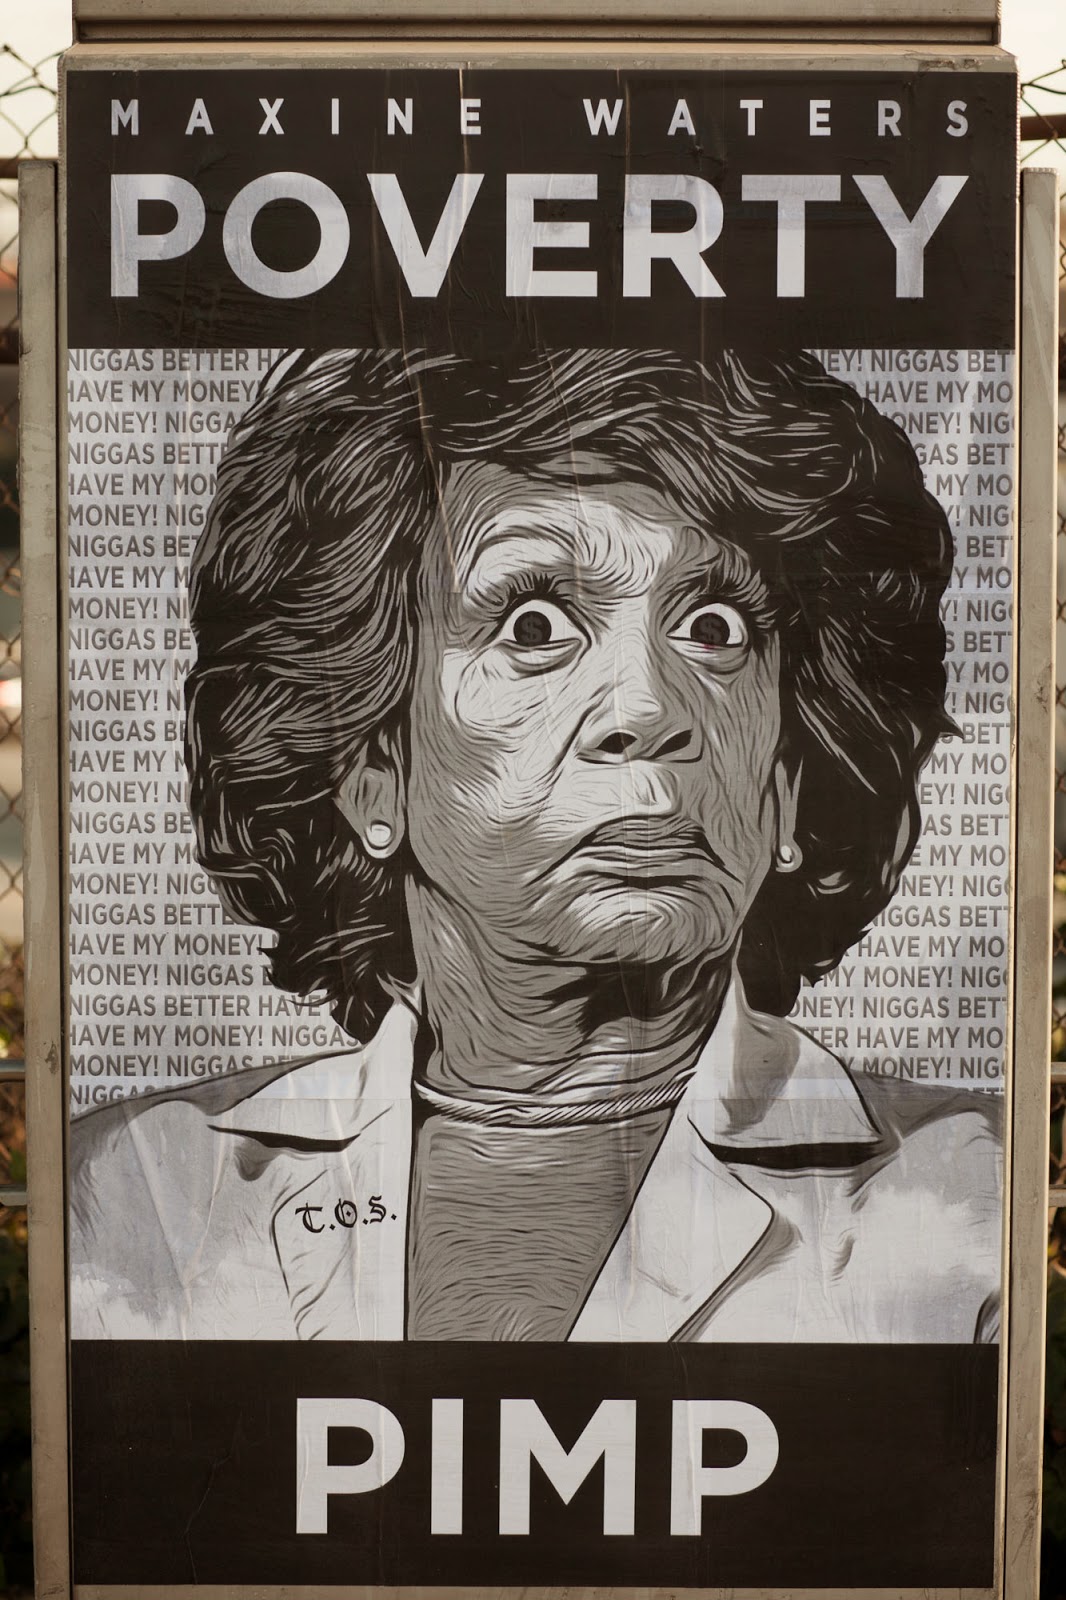 Maxine-Waters-Poverty-Pimp-Poster-Detail.jpg